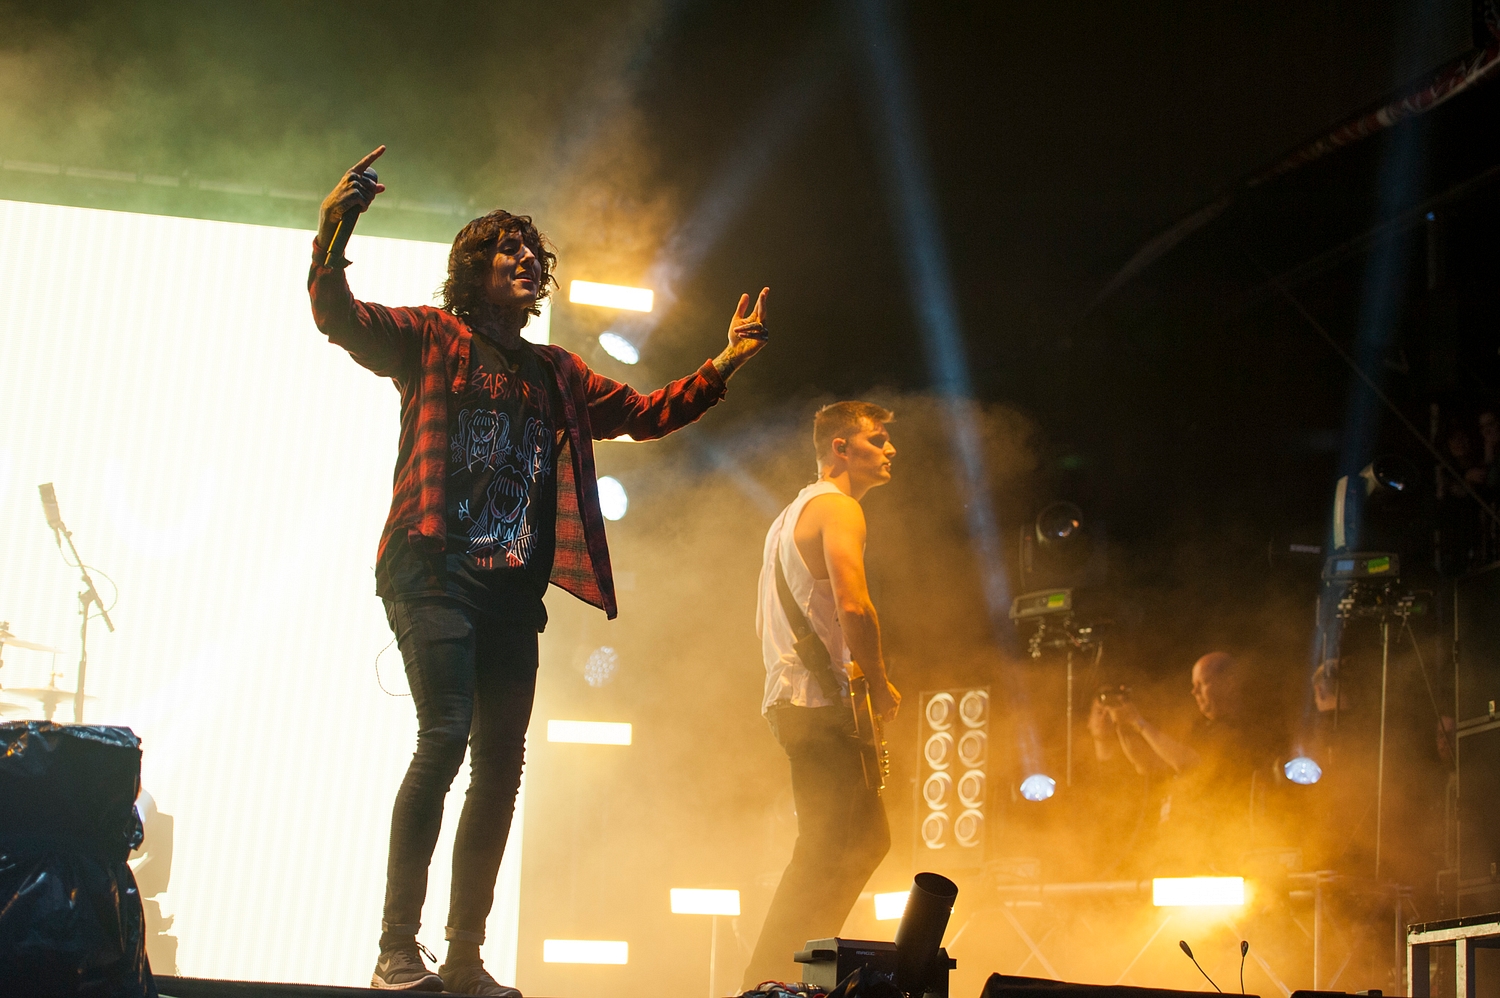 Bring Me the Horizon: The future is now